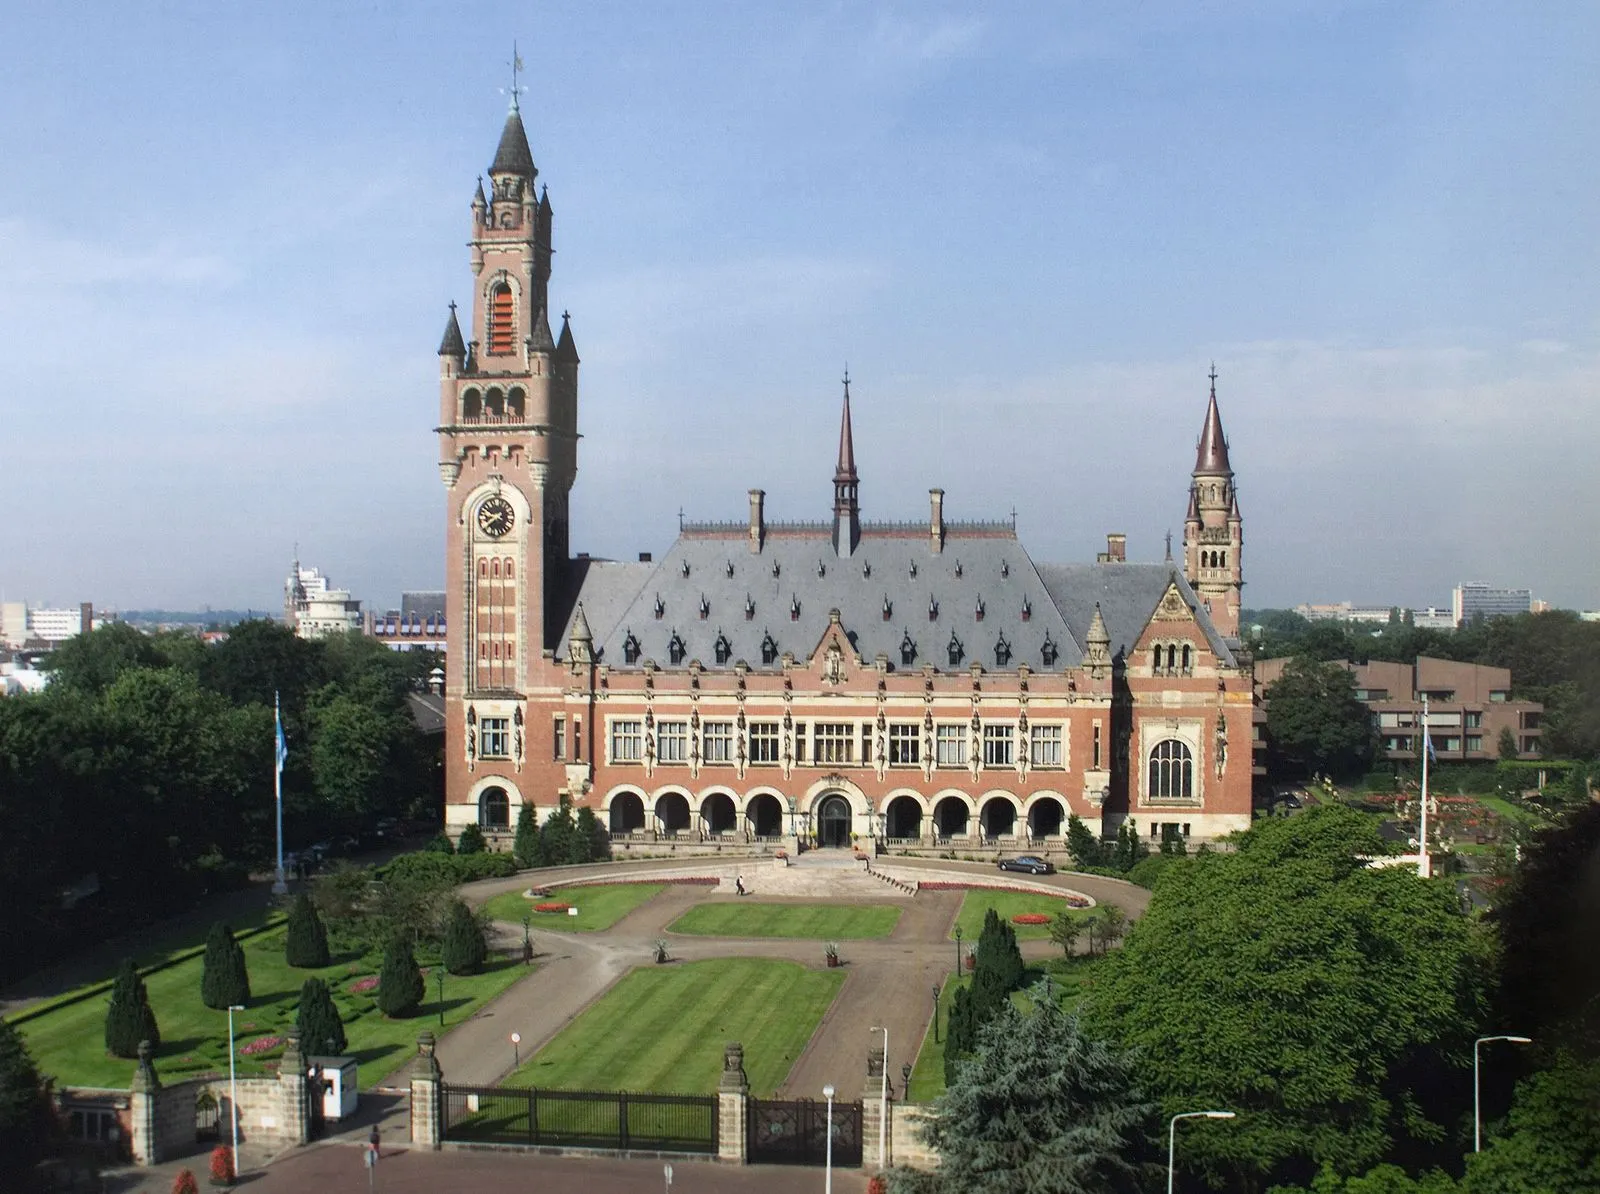 Photo showing: The Peace Palace in The Hague, Netherlands, which is the seat of the International Court of Justice.